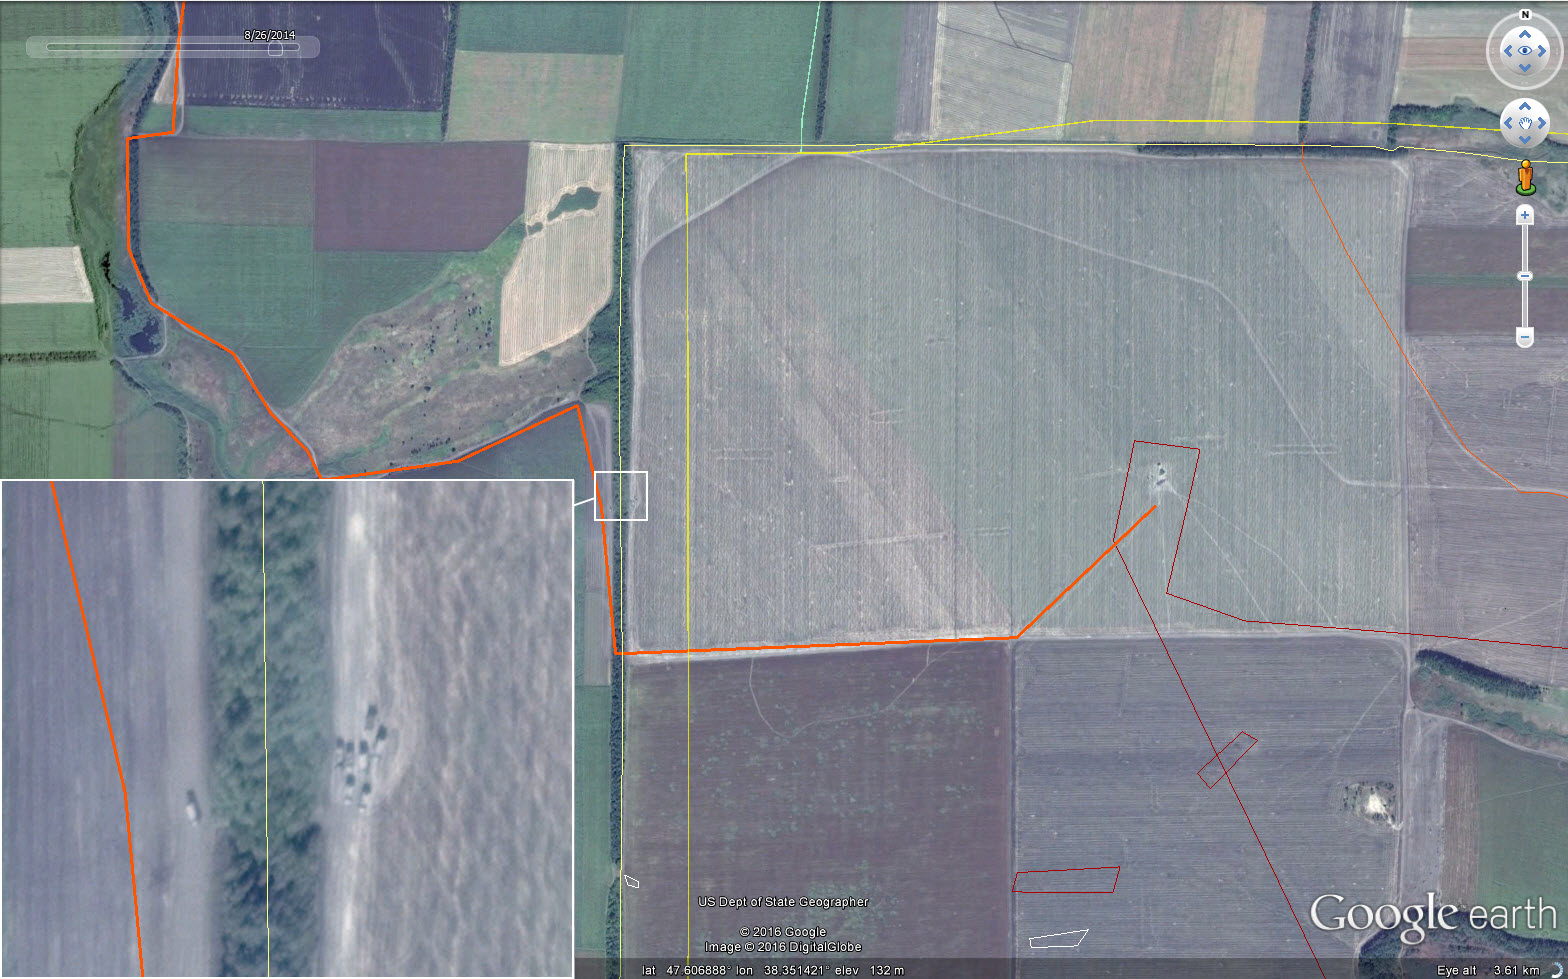 The orange line marks cross-border vehicle path. The yellow line marks the Russia-Ukraine border, according to Google Earth. The line along the treeline is the more accurate representation of the border.